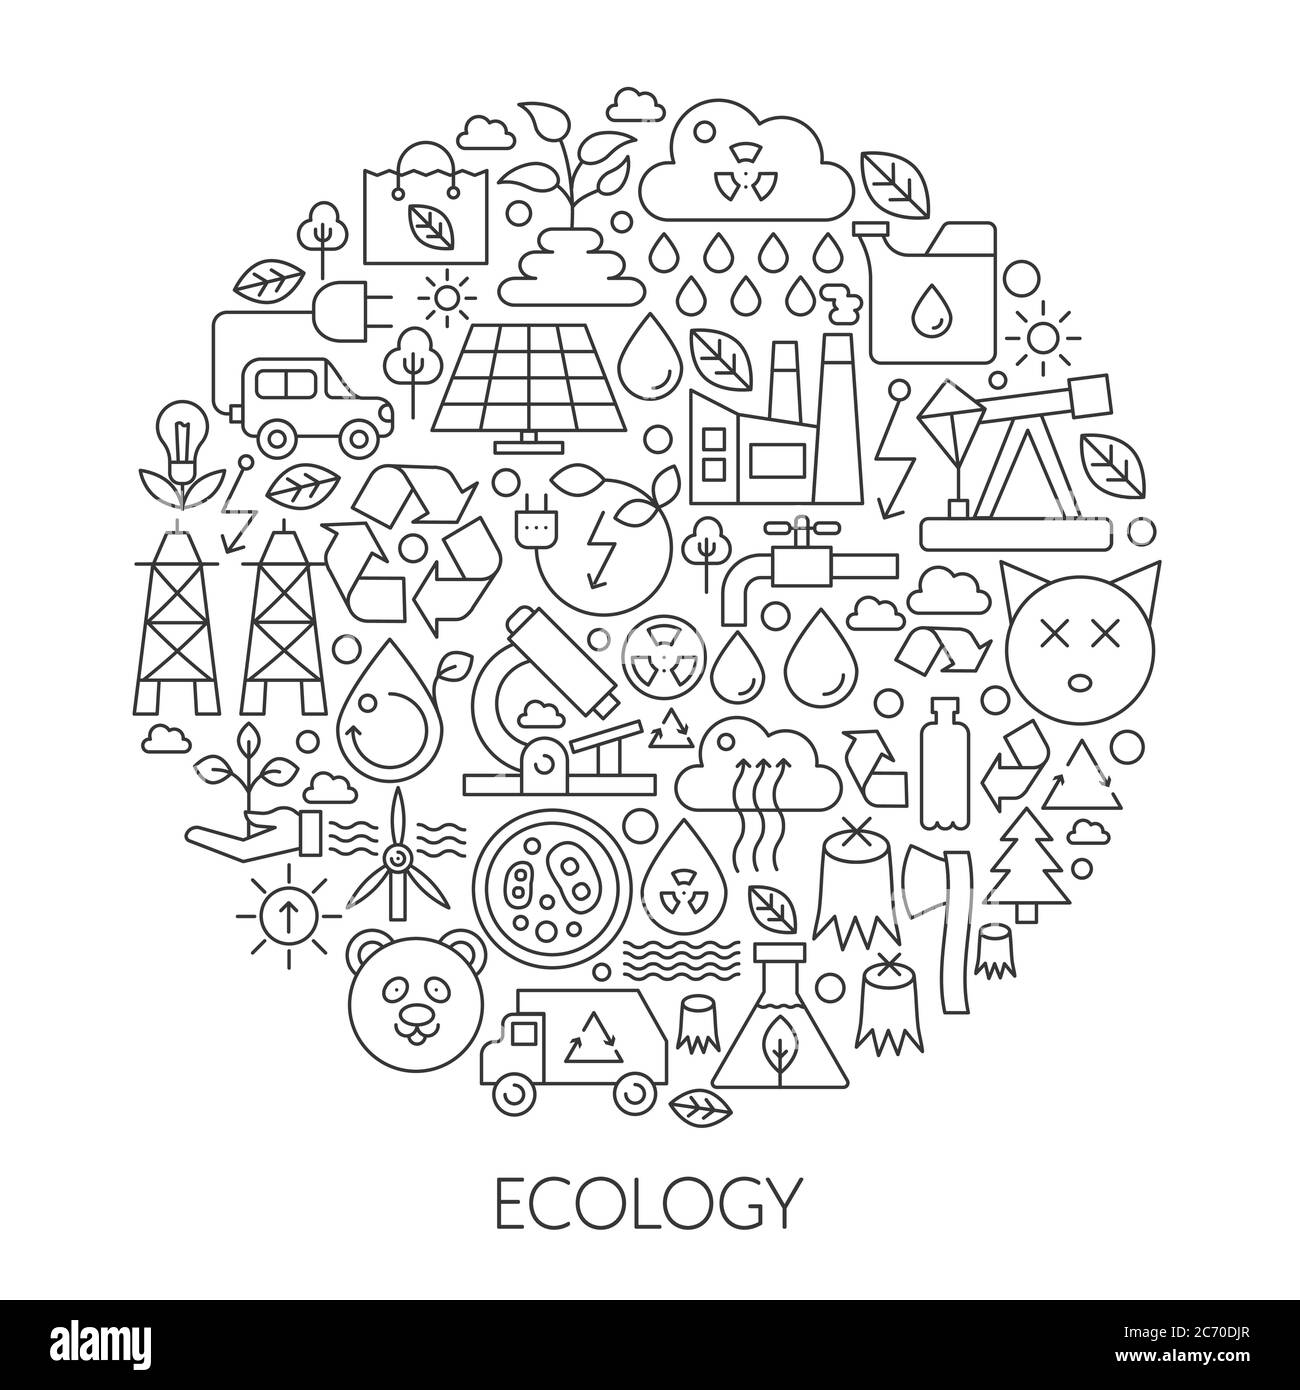 Ecology technology icons in circle - concept line infographic vector illustration for cover, emblem, badge. Outline icon set Stock Vector